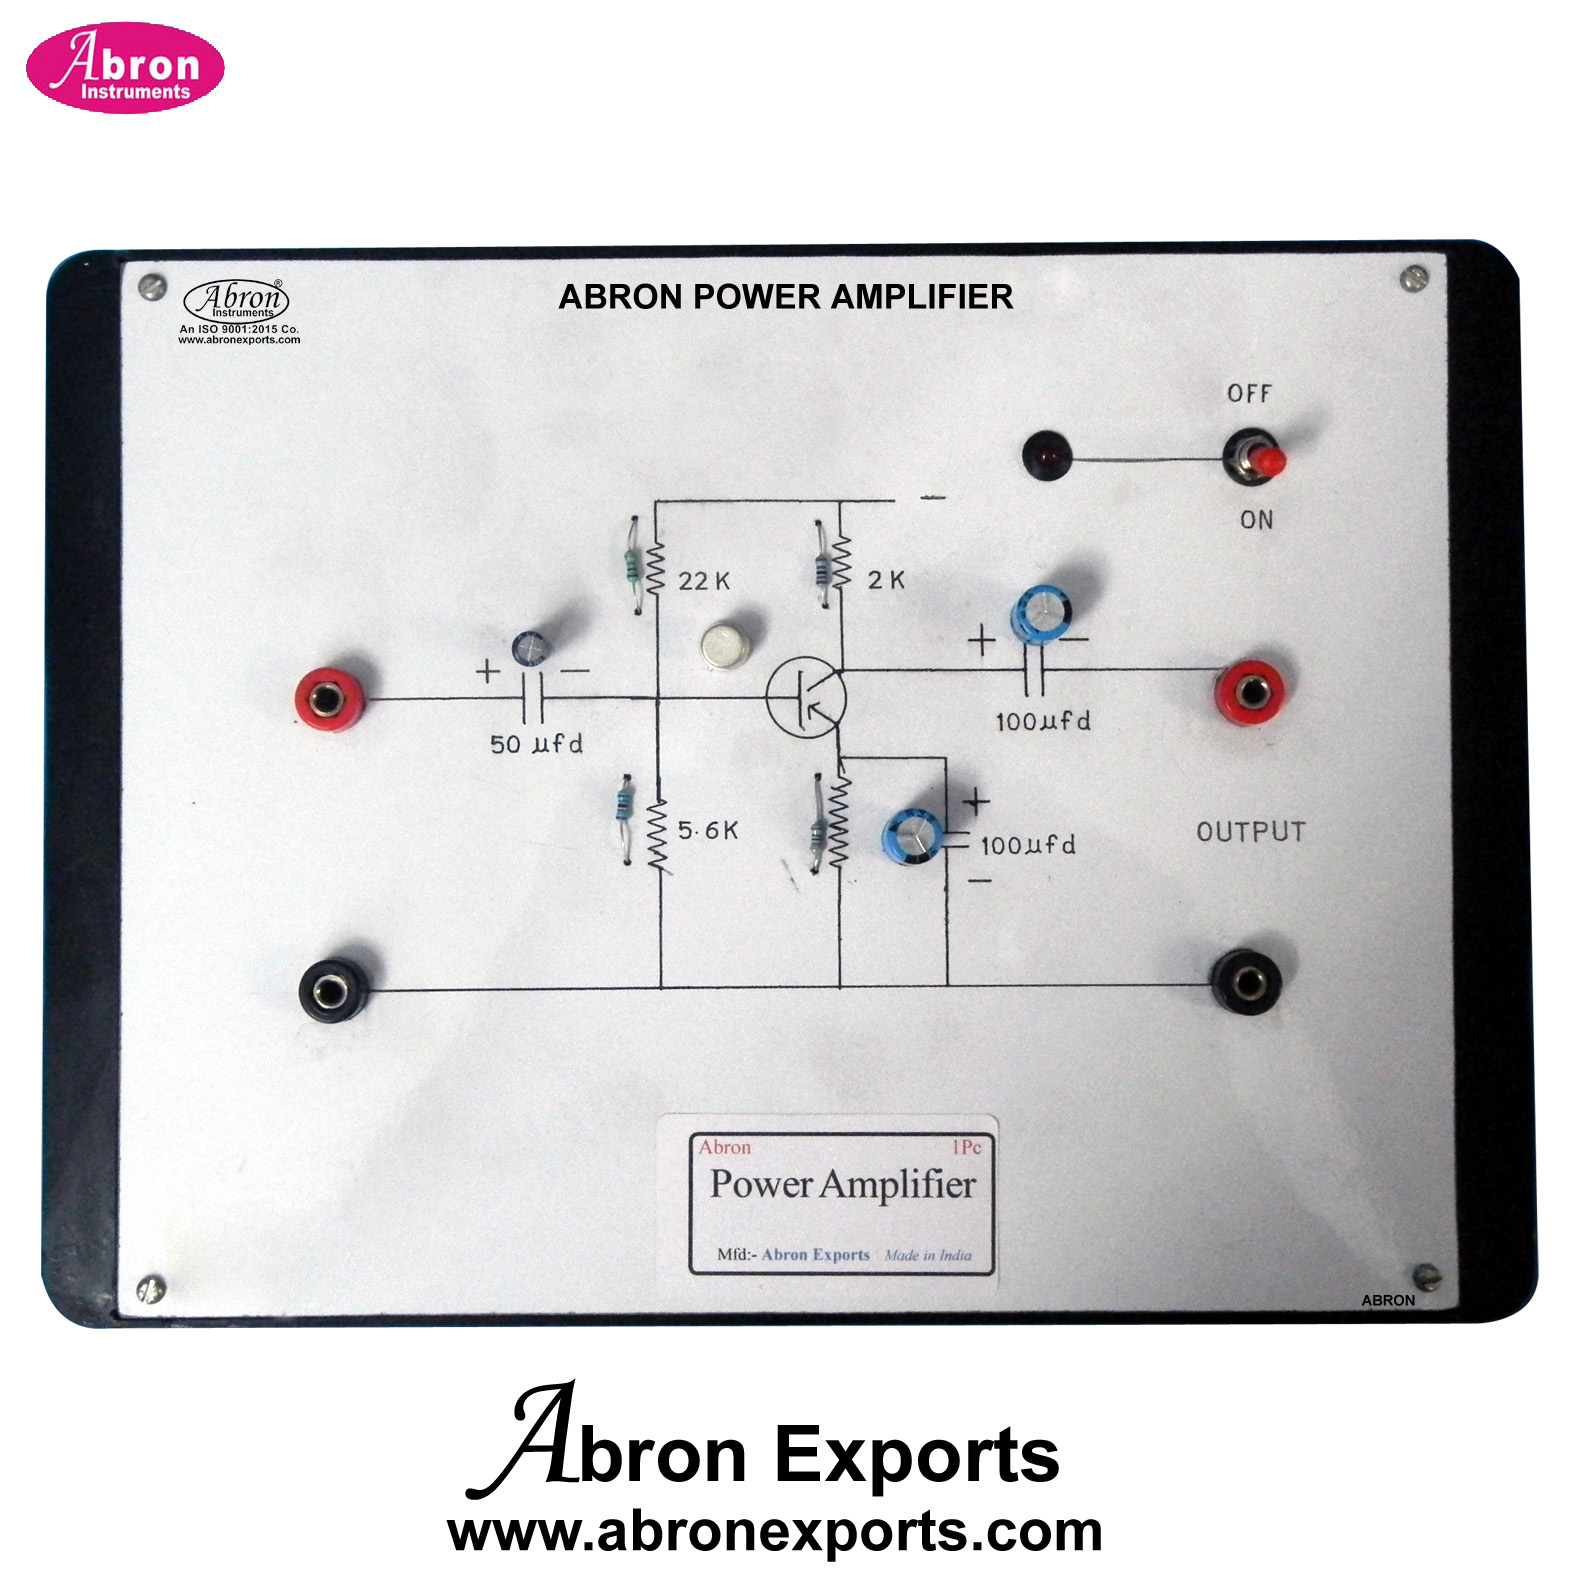 ETB Study Power Amplifier Output to Study on CRO Training Board Supply Abron AE-1258PA 